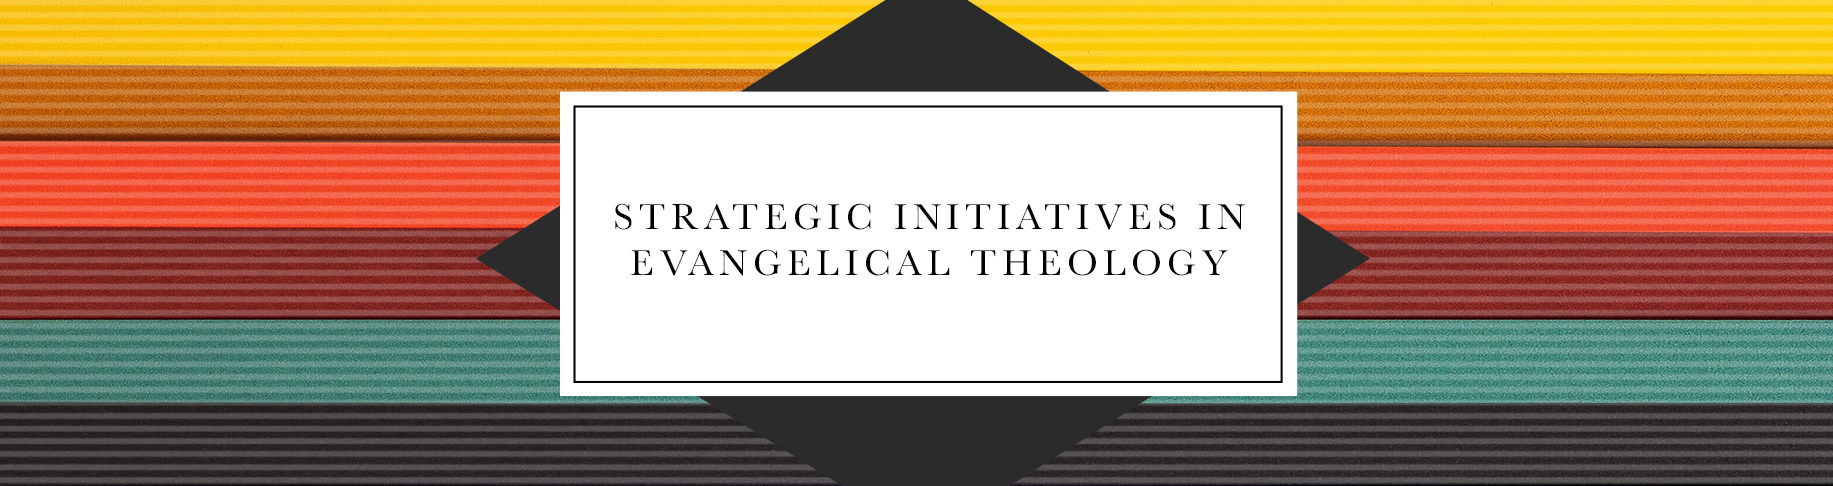 Strategic Initiatives in Evangelical Theology